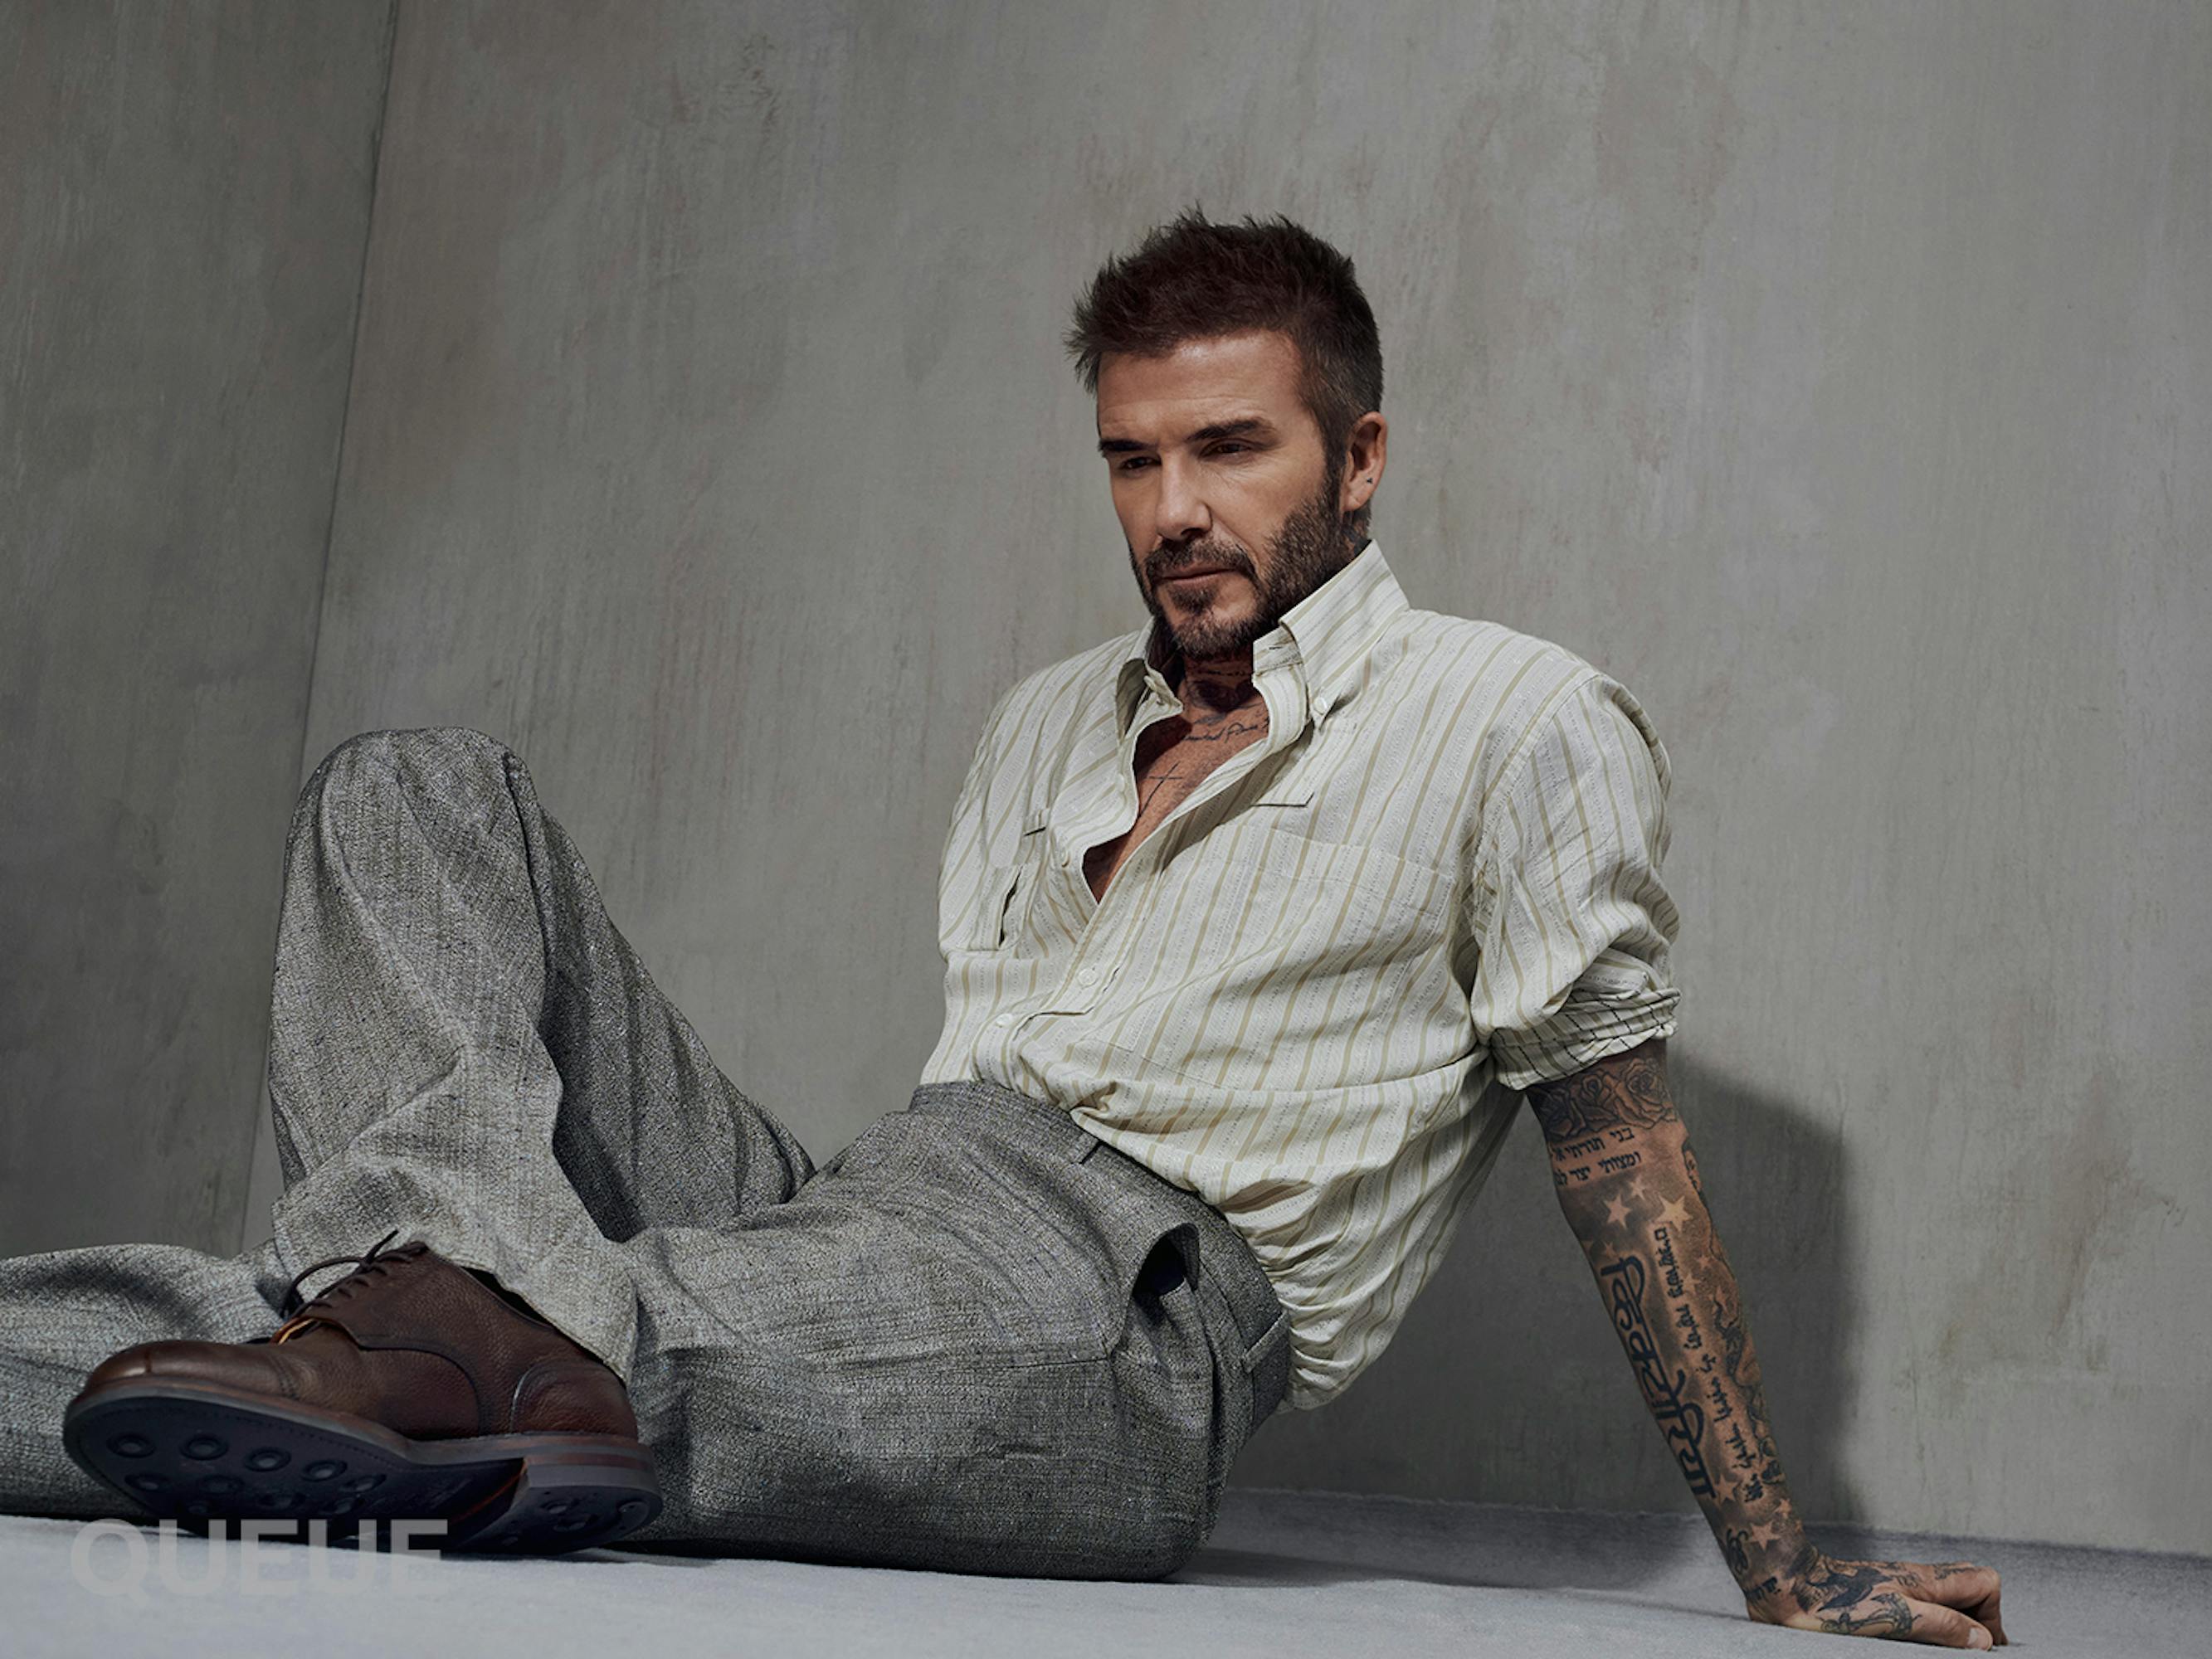 David Beckham wears gray pants and a light gray shirt and rests against a gray wall.